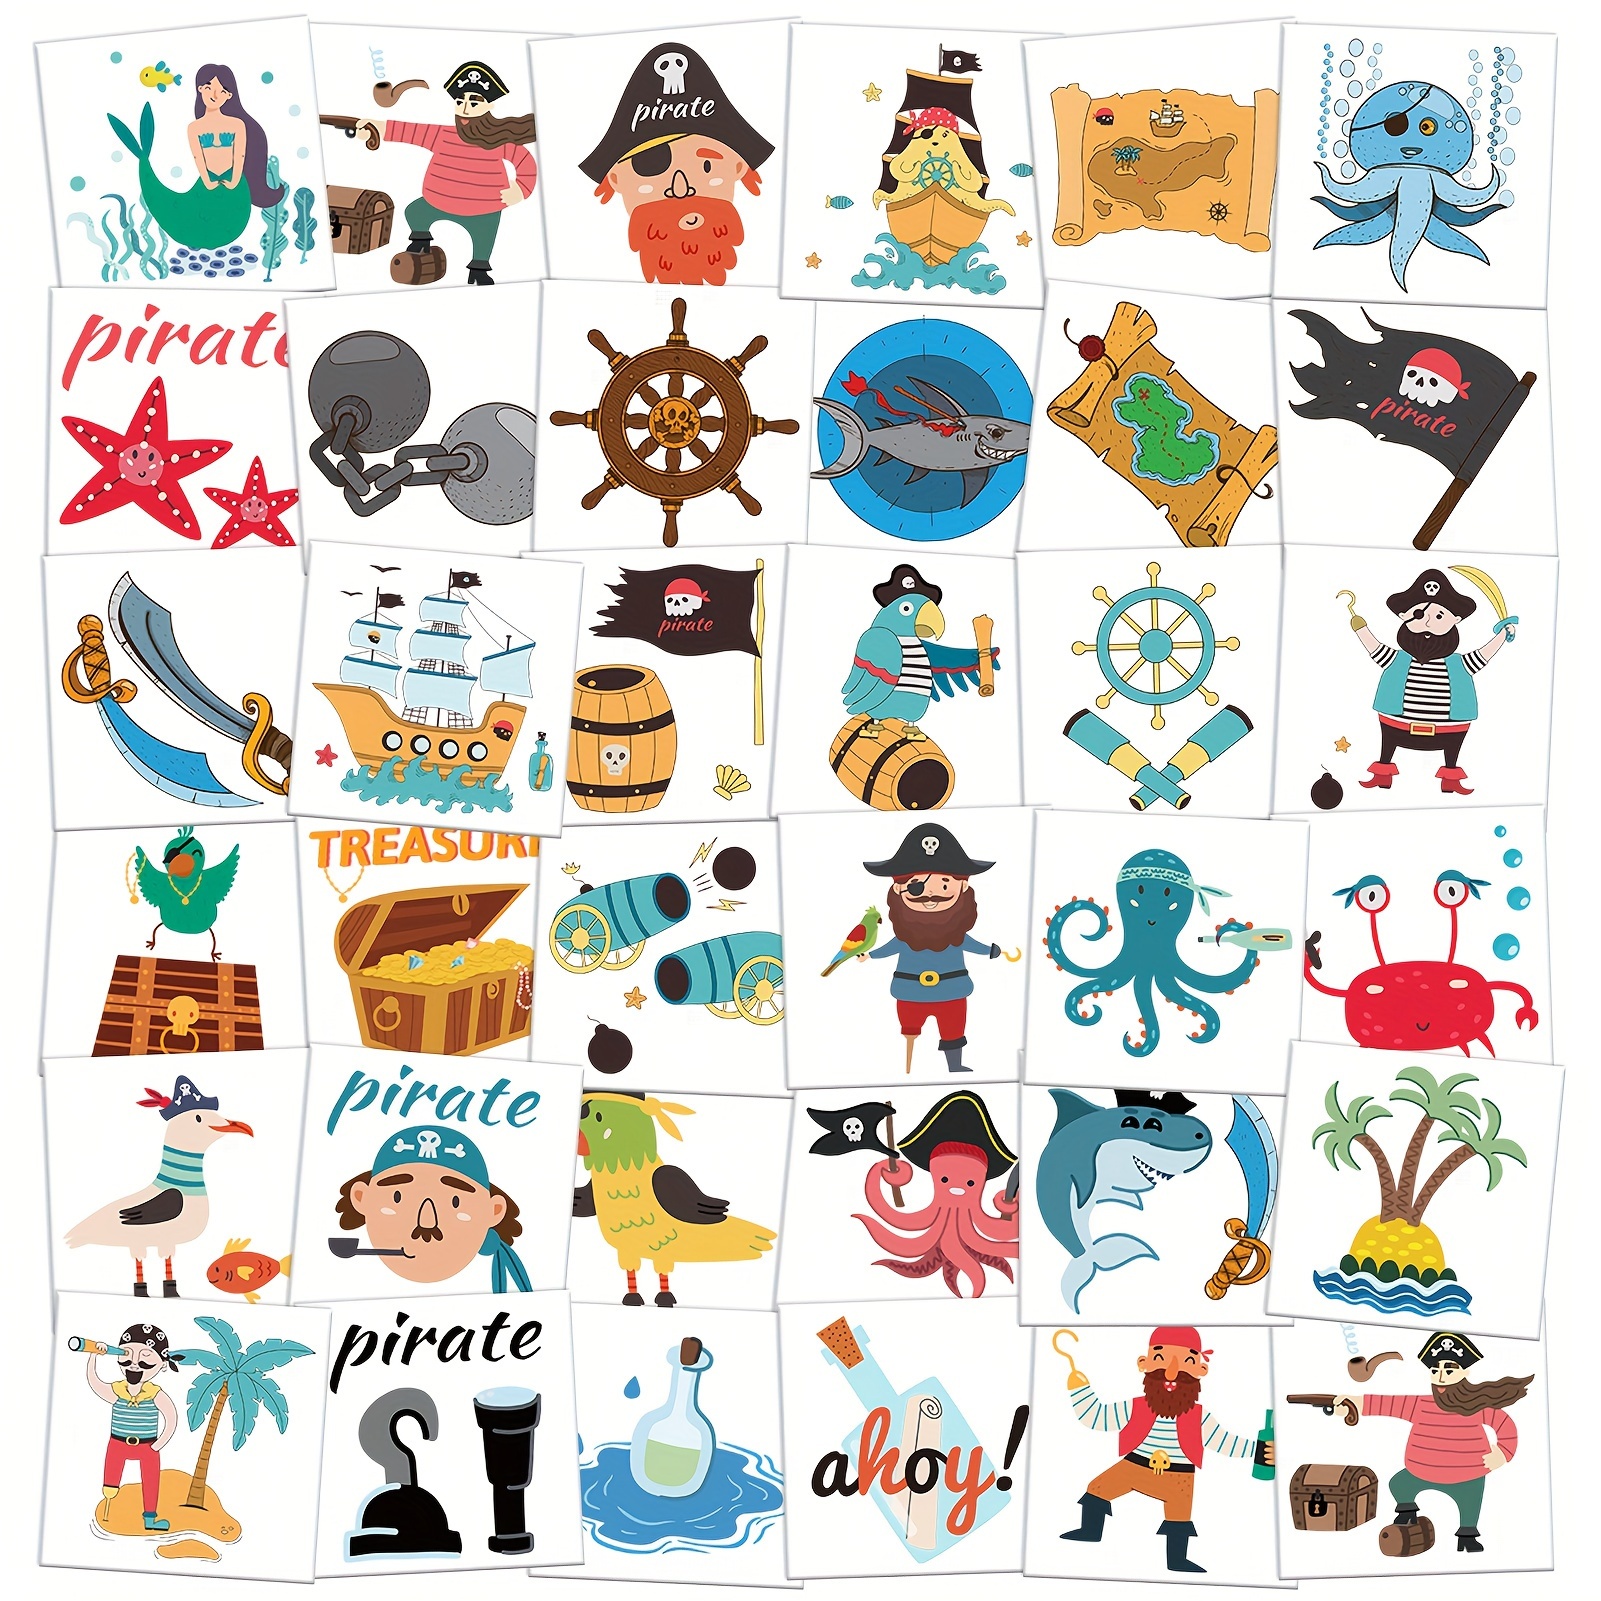 

50 Sheets Individually Wrapped Pirate Tattoos For Boys, Temporary Tattoos For Pirate Party Favors Supplies Decorations, Pirate Themed Party Decorations For Gifts Goodie Bags